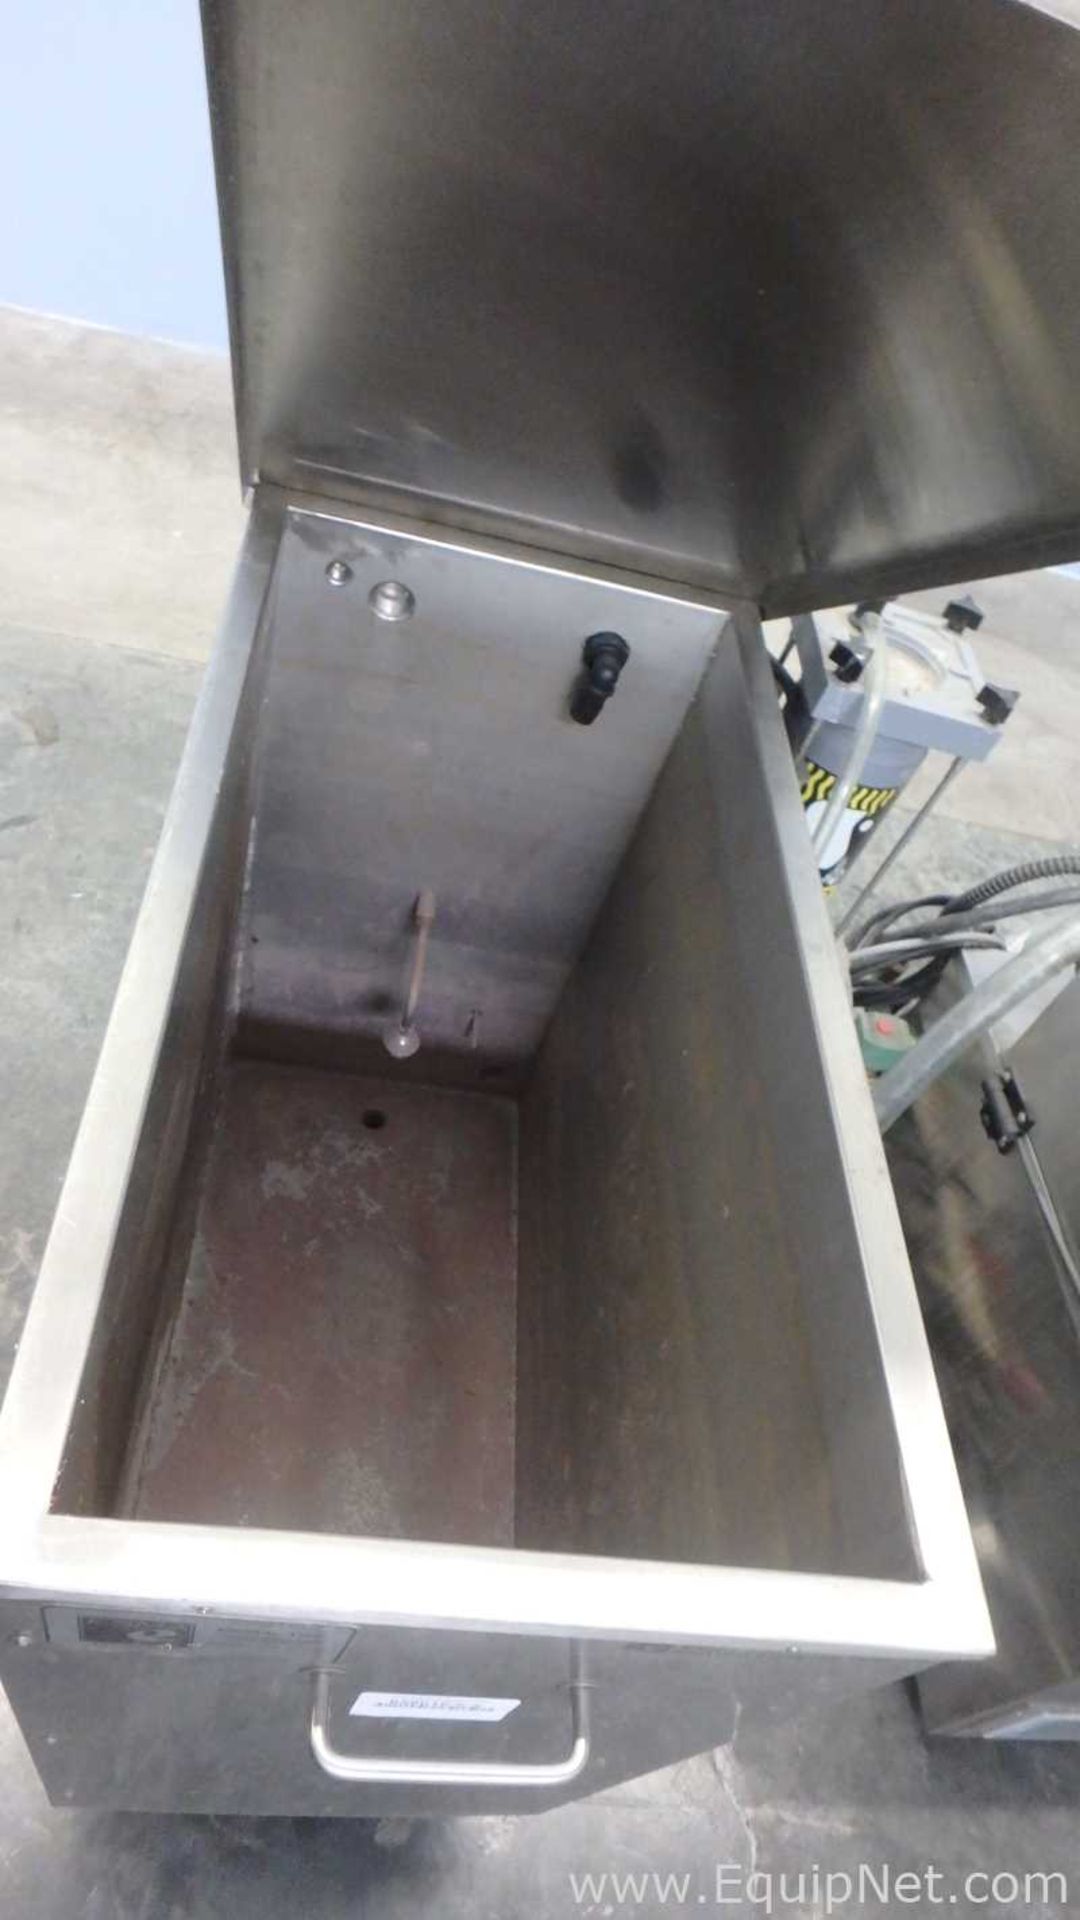 ESMA Inc. E700 Ultrasonic Cleaning System with E997 30Gal Heated Storage Tank - Image 26 of 38